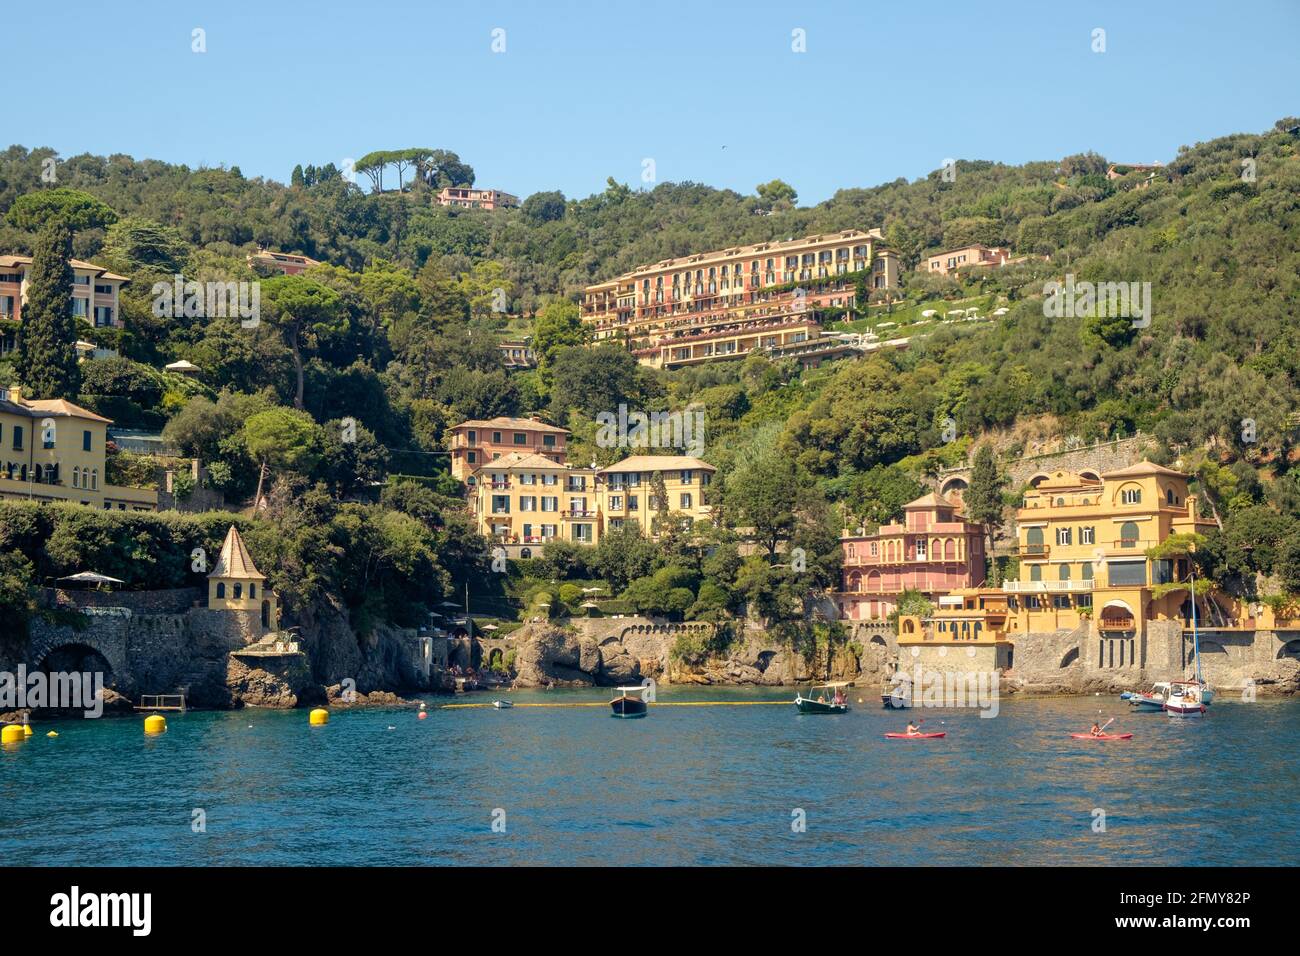 Hotels and other elegant buildings are built on a green hill that arises from the Ligurian sea. They are part of Santa Margherita Ligure. Stock Photo